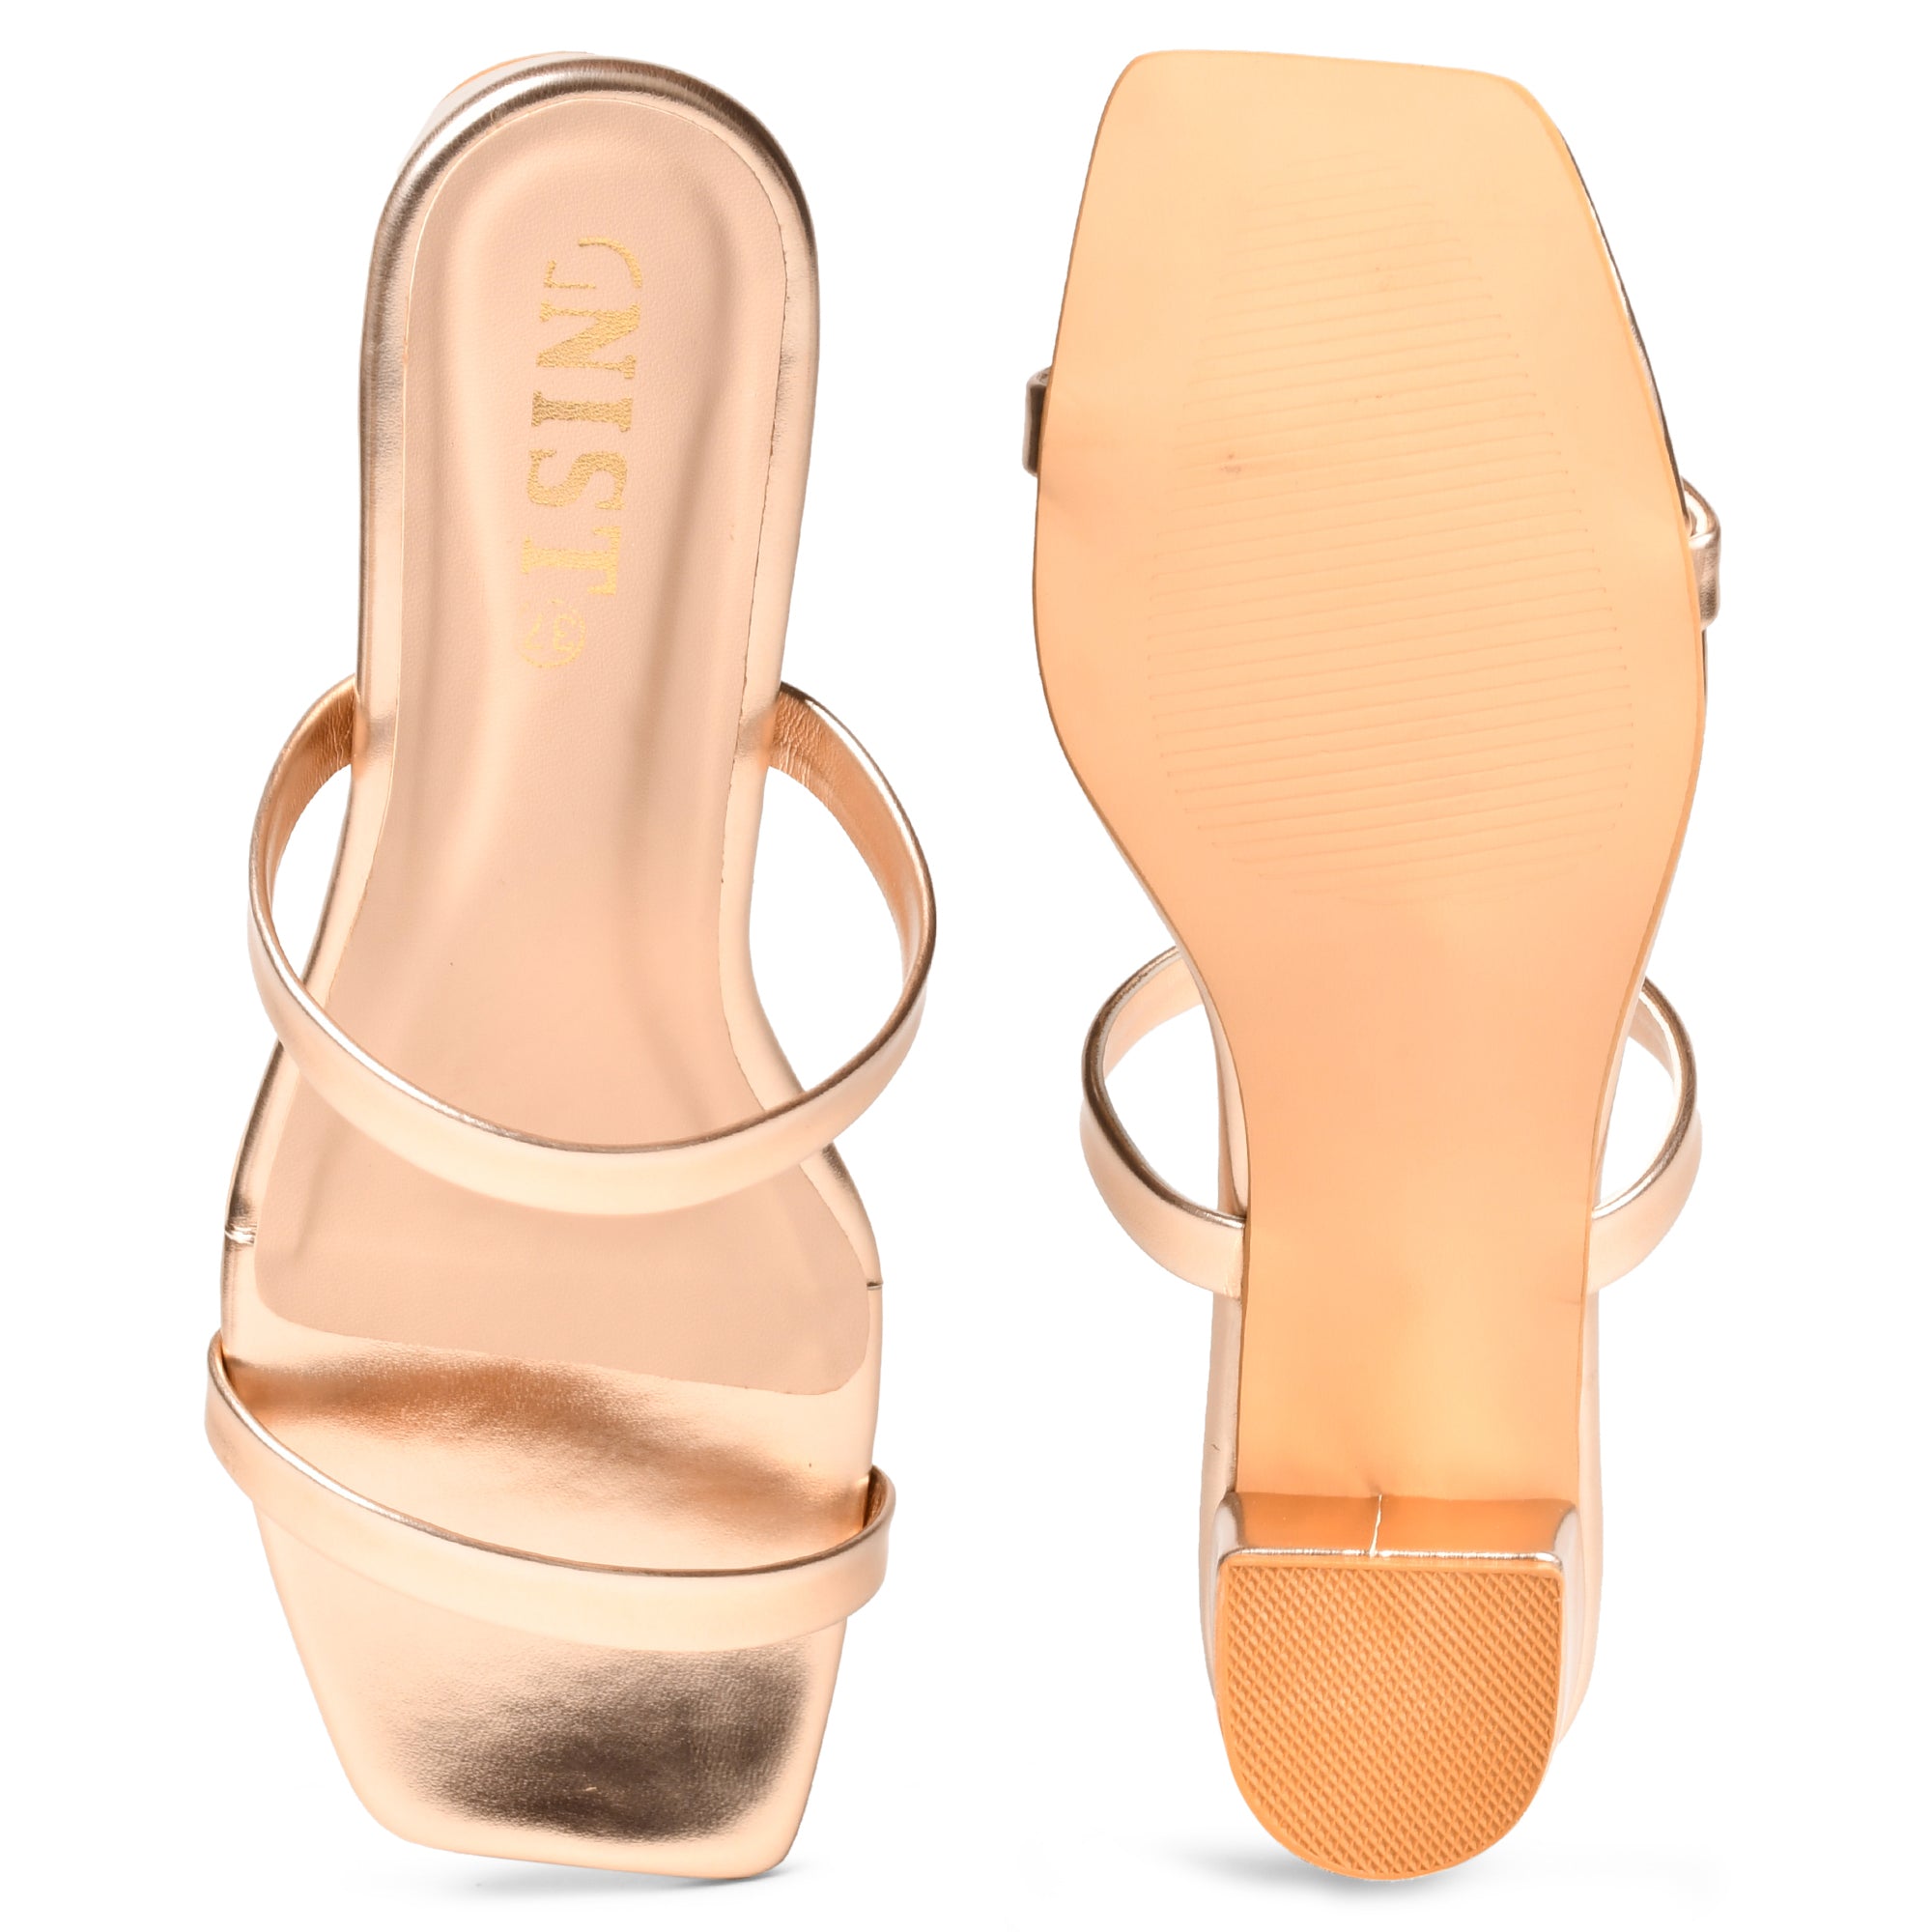 GNIST Double Strap Rosegold Chunky Heels